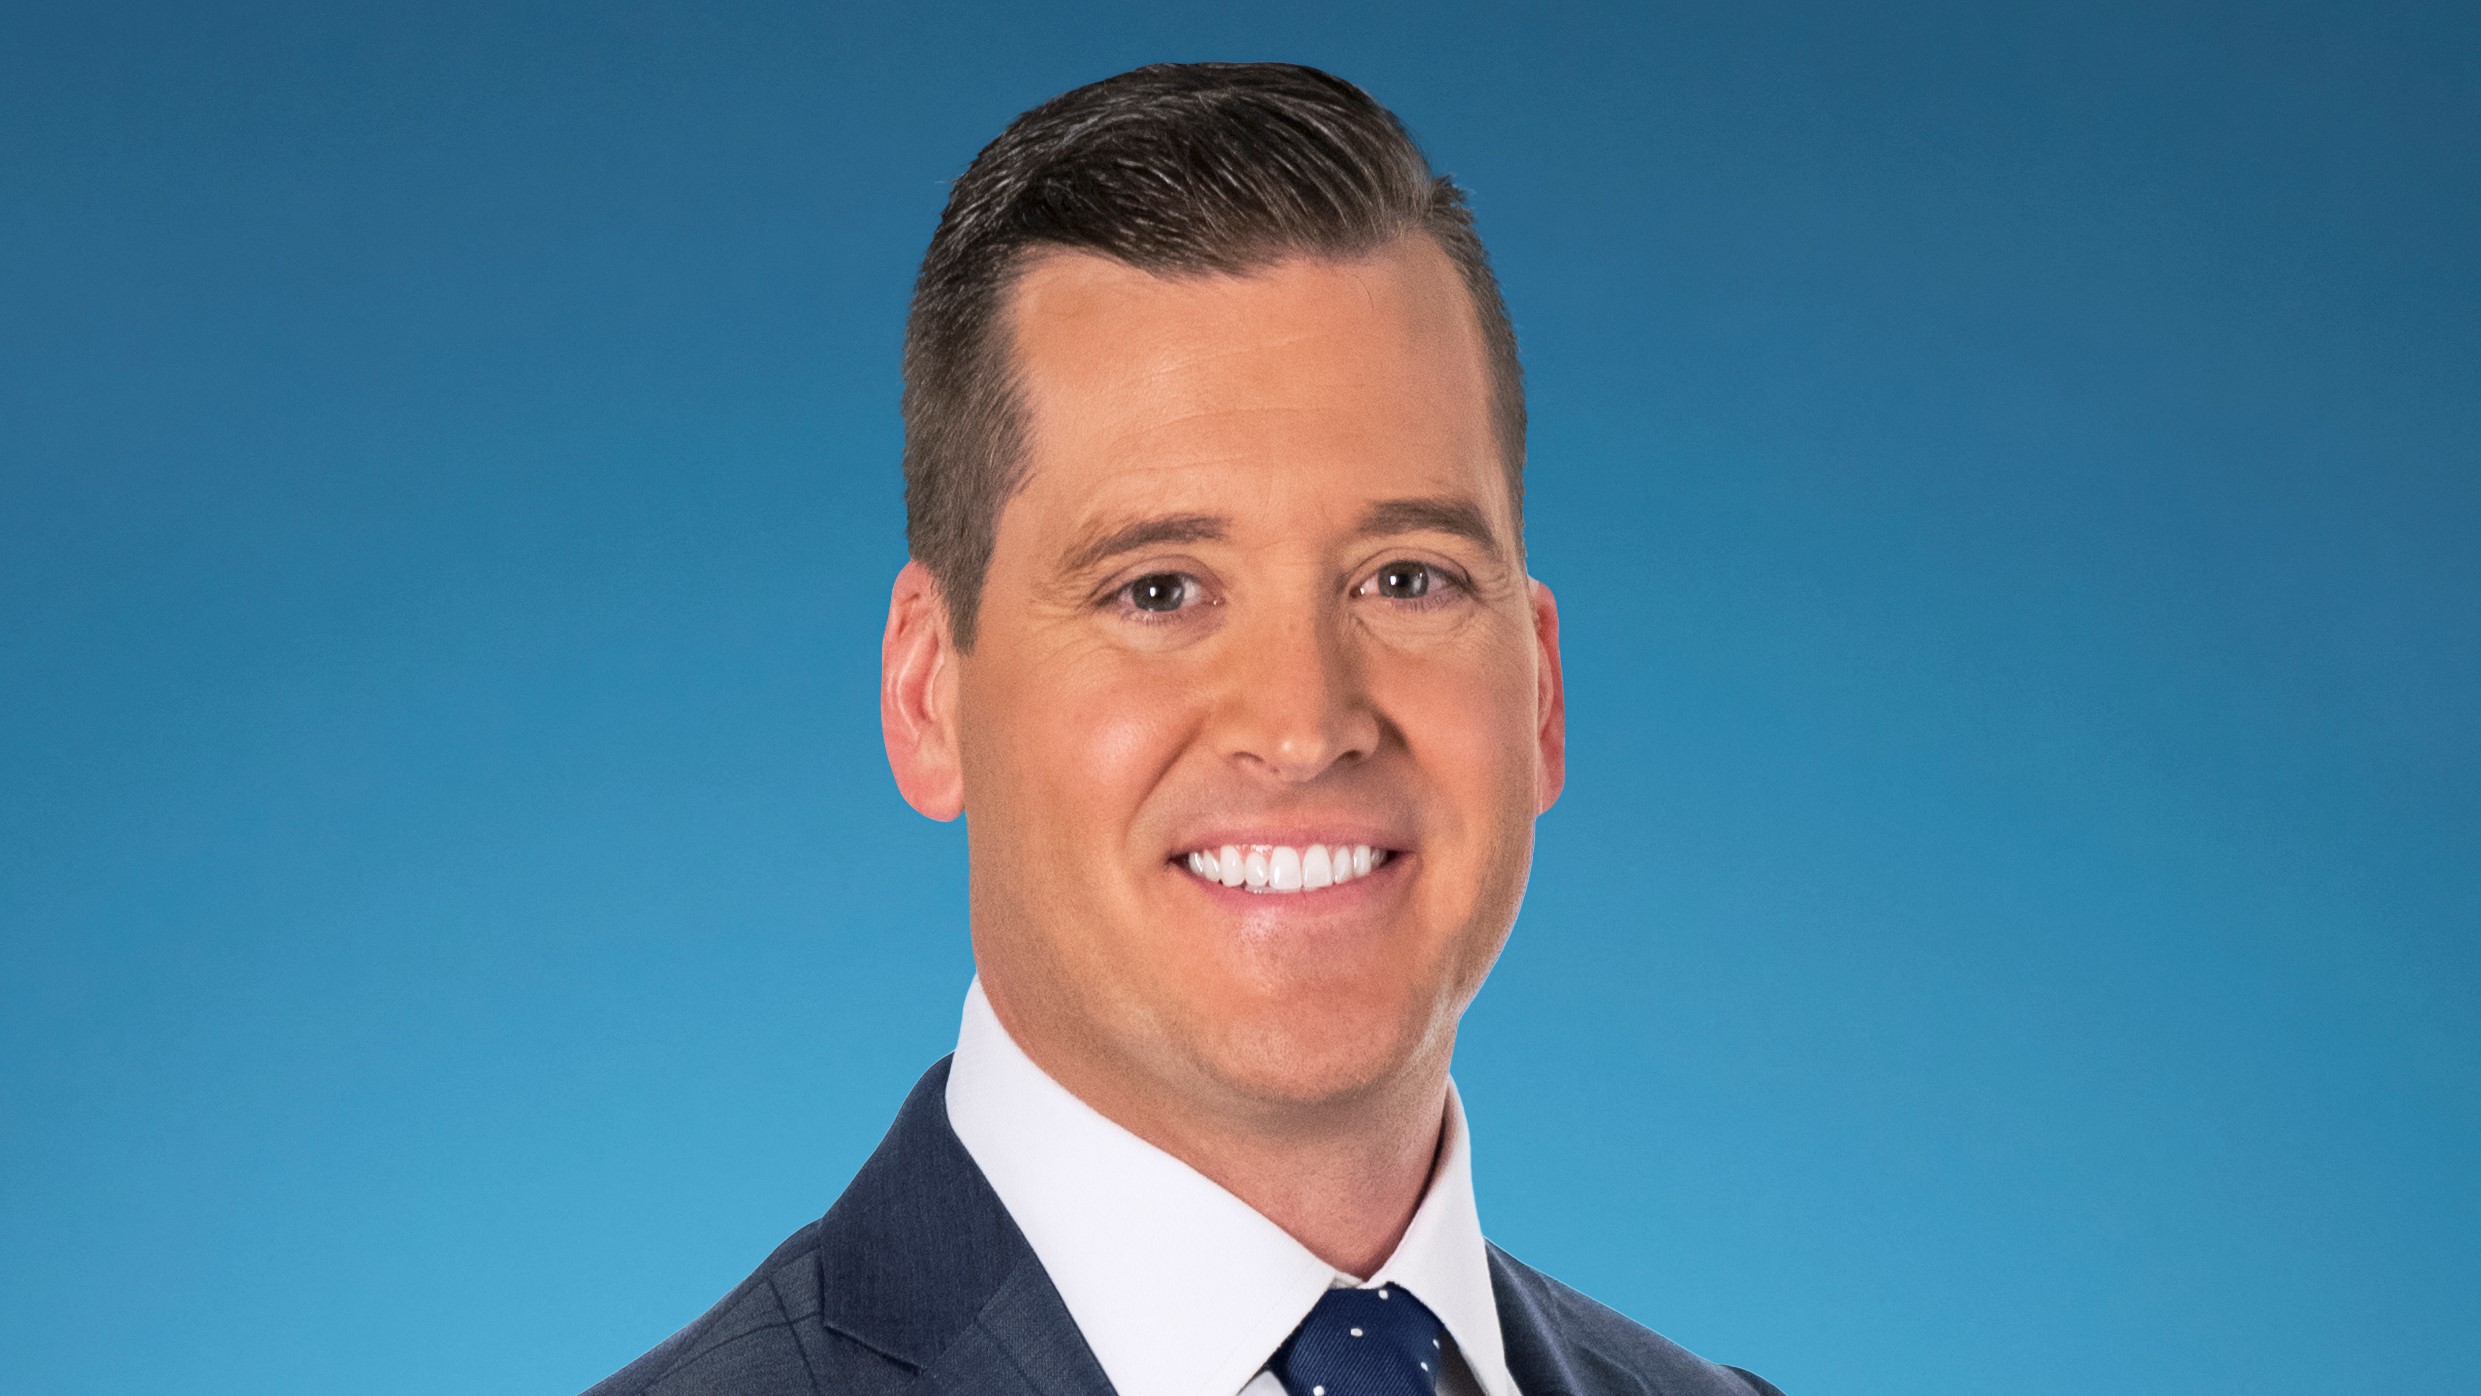 NewsNation Adds ‘Early Morning’ Anchored by Mitch Carr at 6 a.m. | Next TV